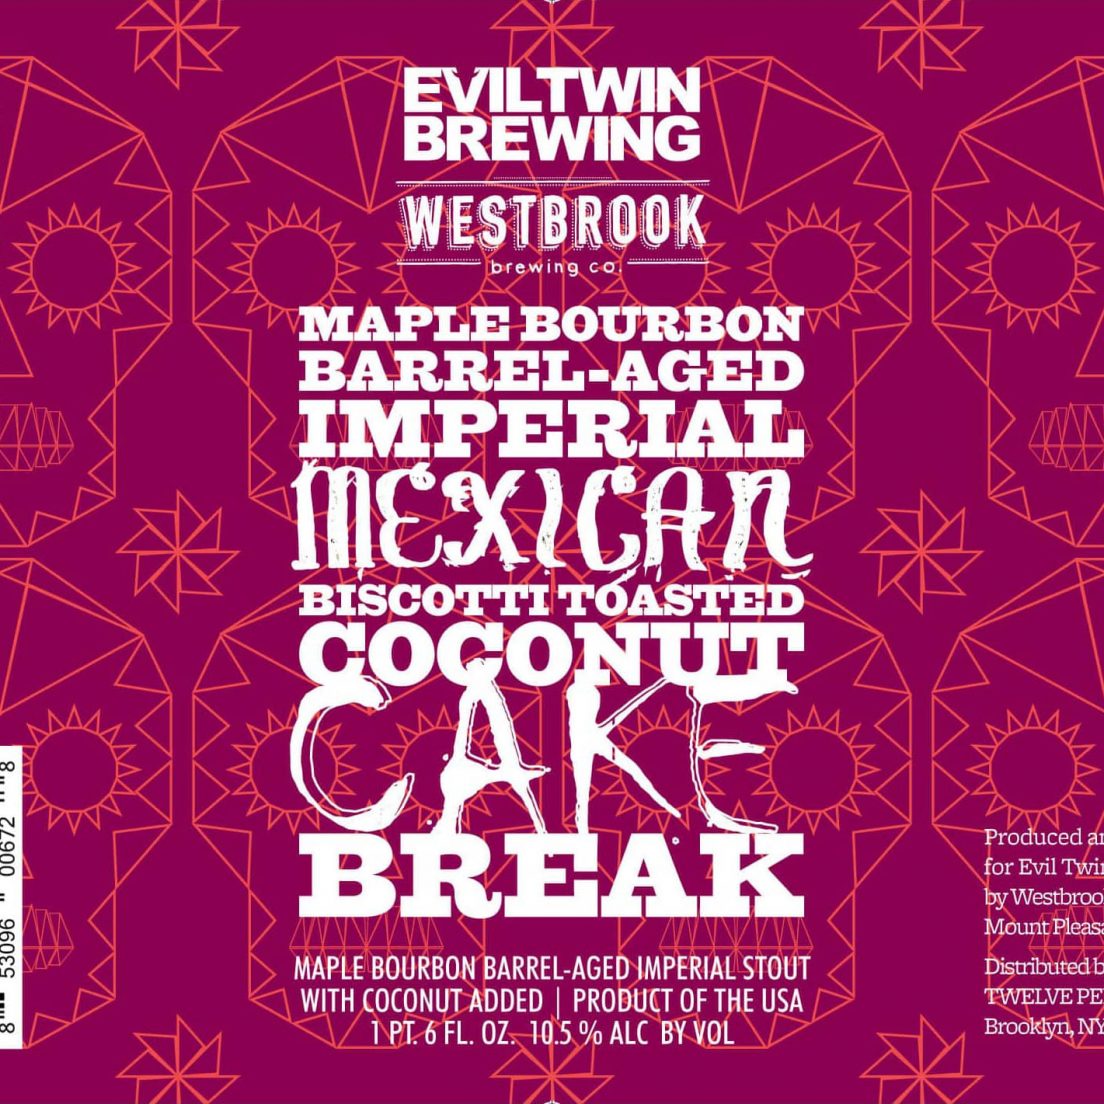 Evil Twin Maple Bourbon Barrel-Aged Imperial Mexican Biscotti Toasted Coconut Cake Break